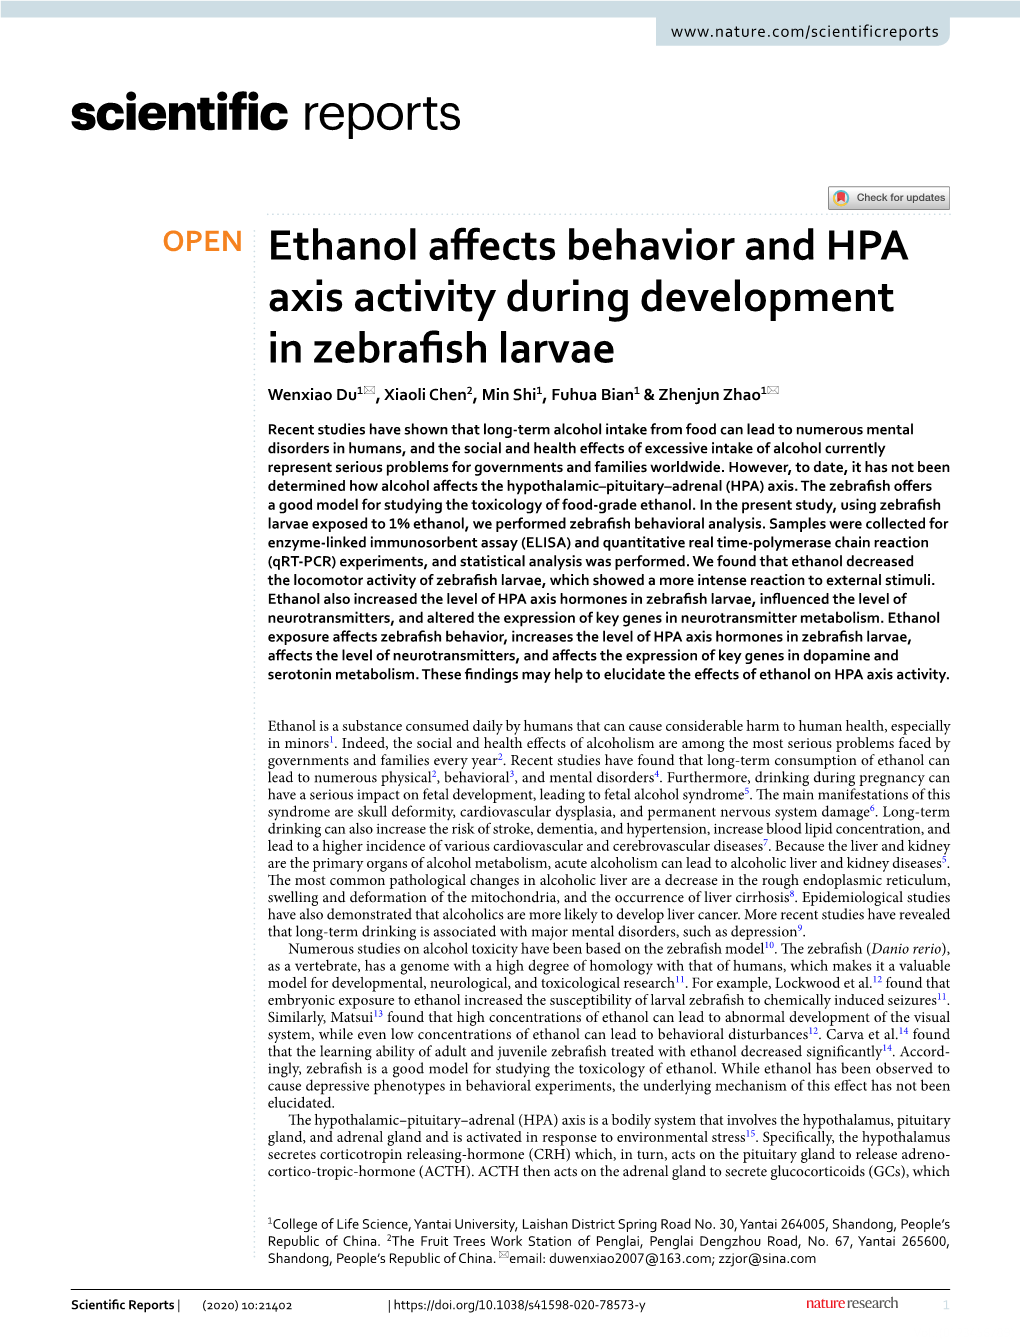 Ethanol Affects Behavior and HPA Axis Activity During Development In